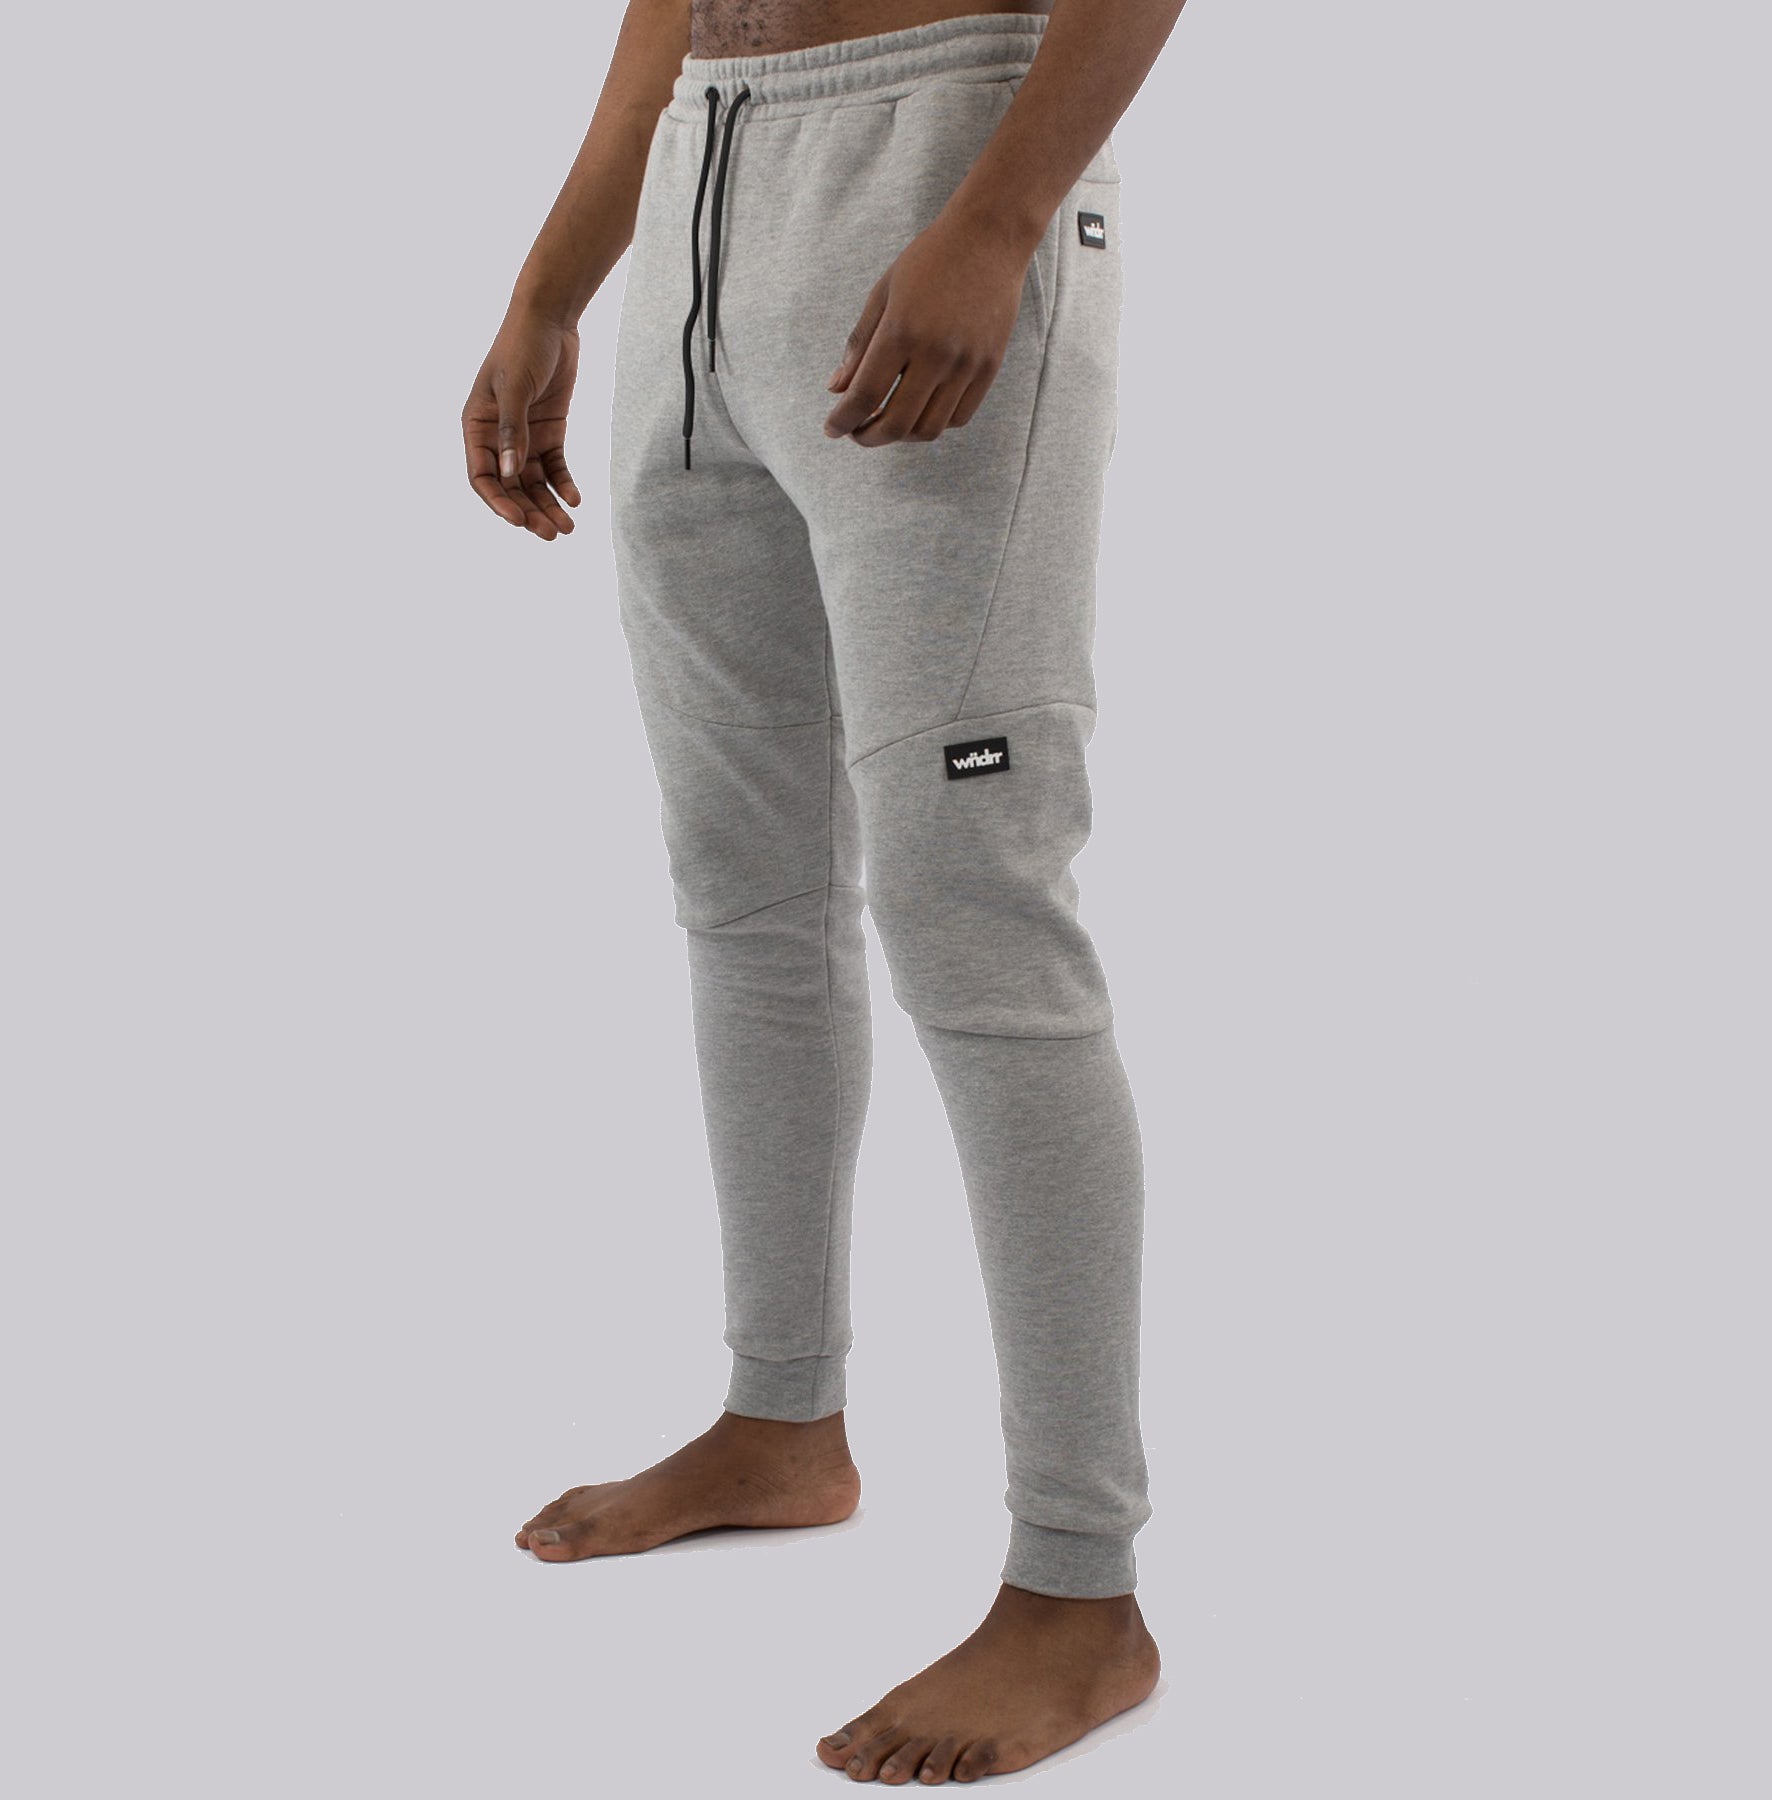 WNDRR Hoxton Trackpant - Grey Marle - Forestwood Co